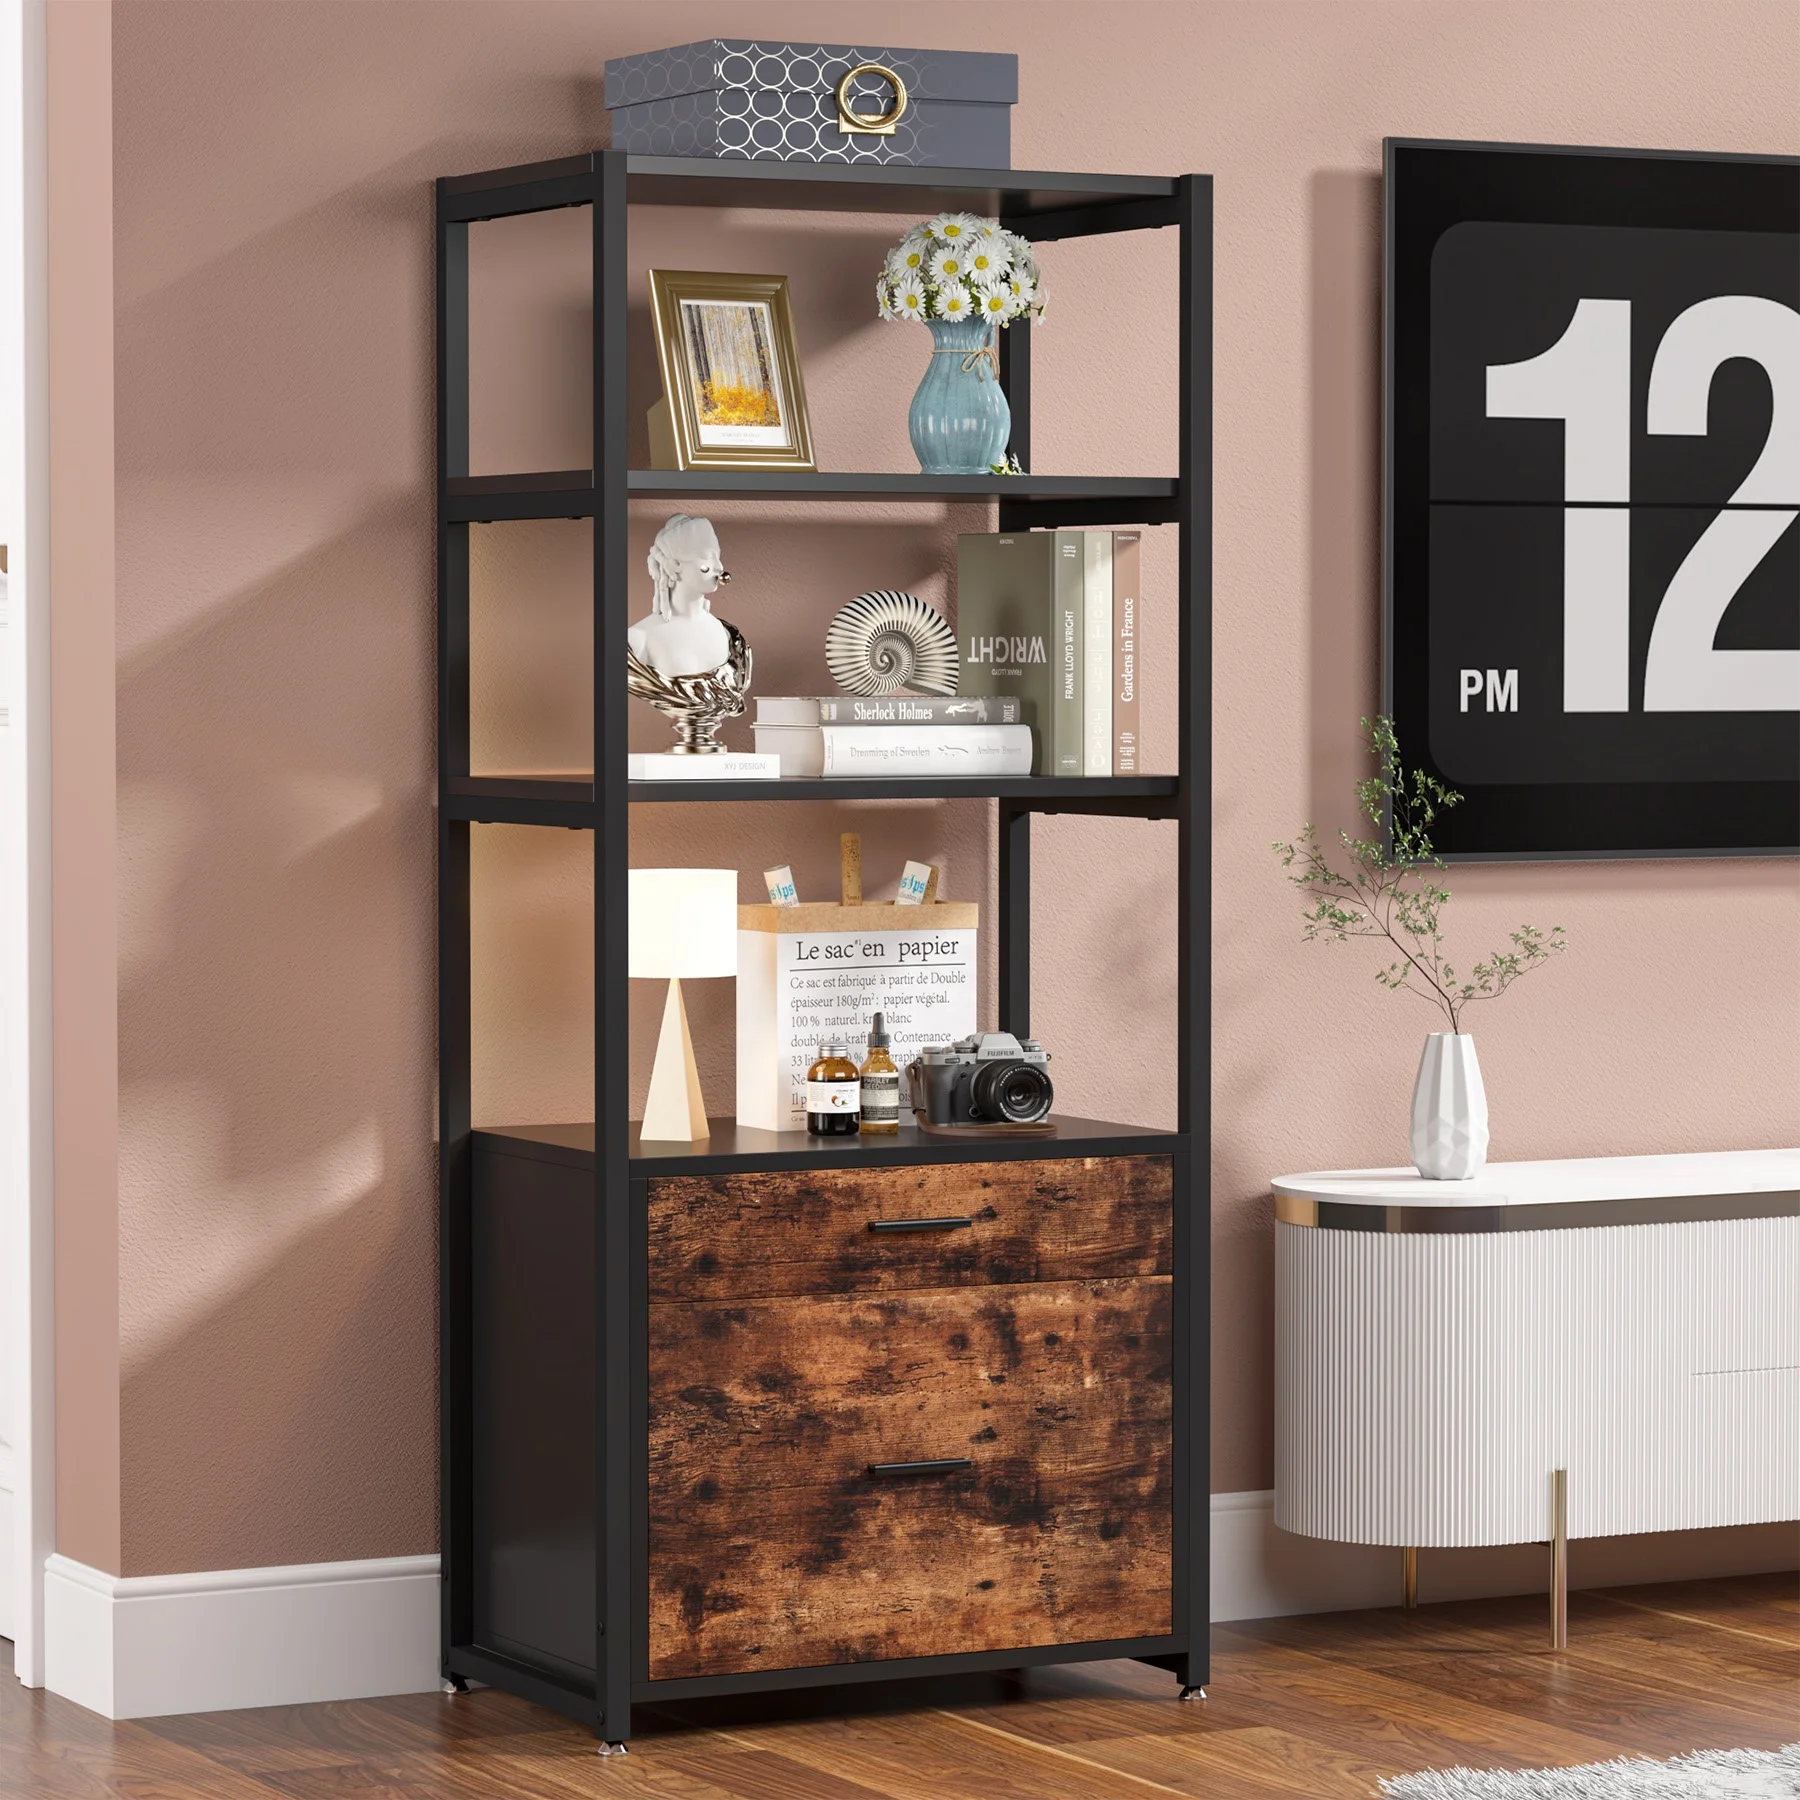 Brown Office 2 Drawer Vertical File Cabinet Home Filing Cabinets Storage Shelf for Blankets Books Files Magazines Toys